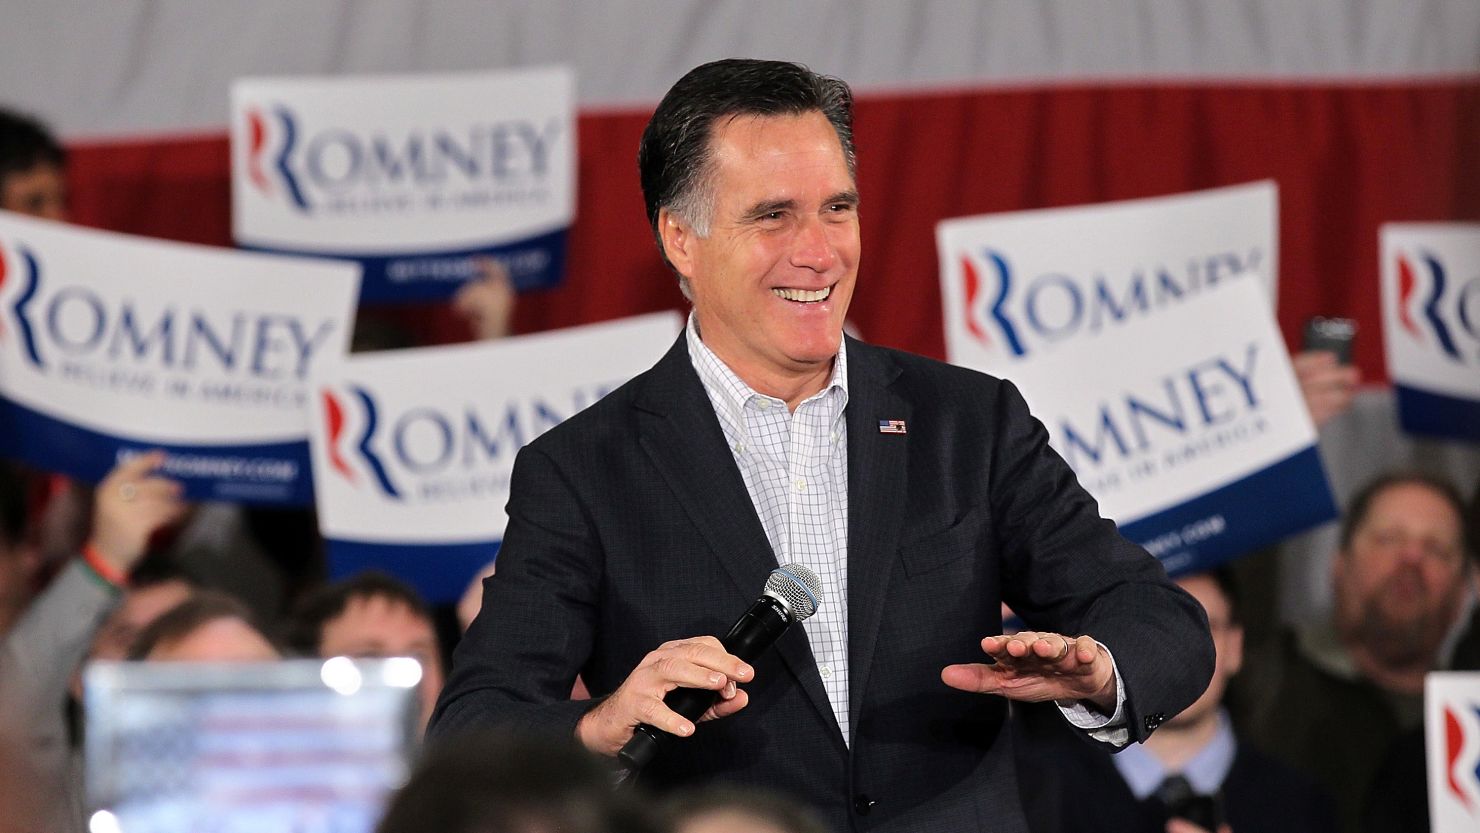 Former Massachusetts governor Mitt Romney won the Washington state caucuses on Saturday as he heads into the pivotal Super Tuesday contests.